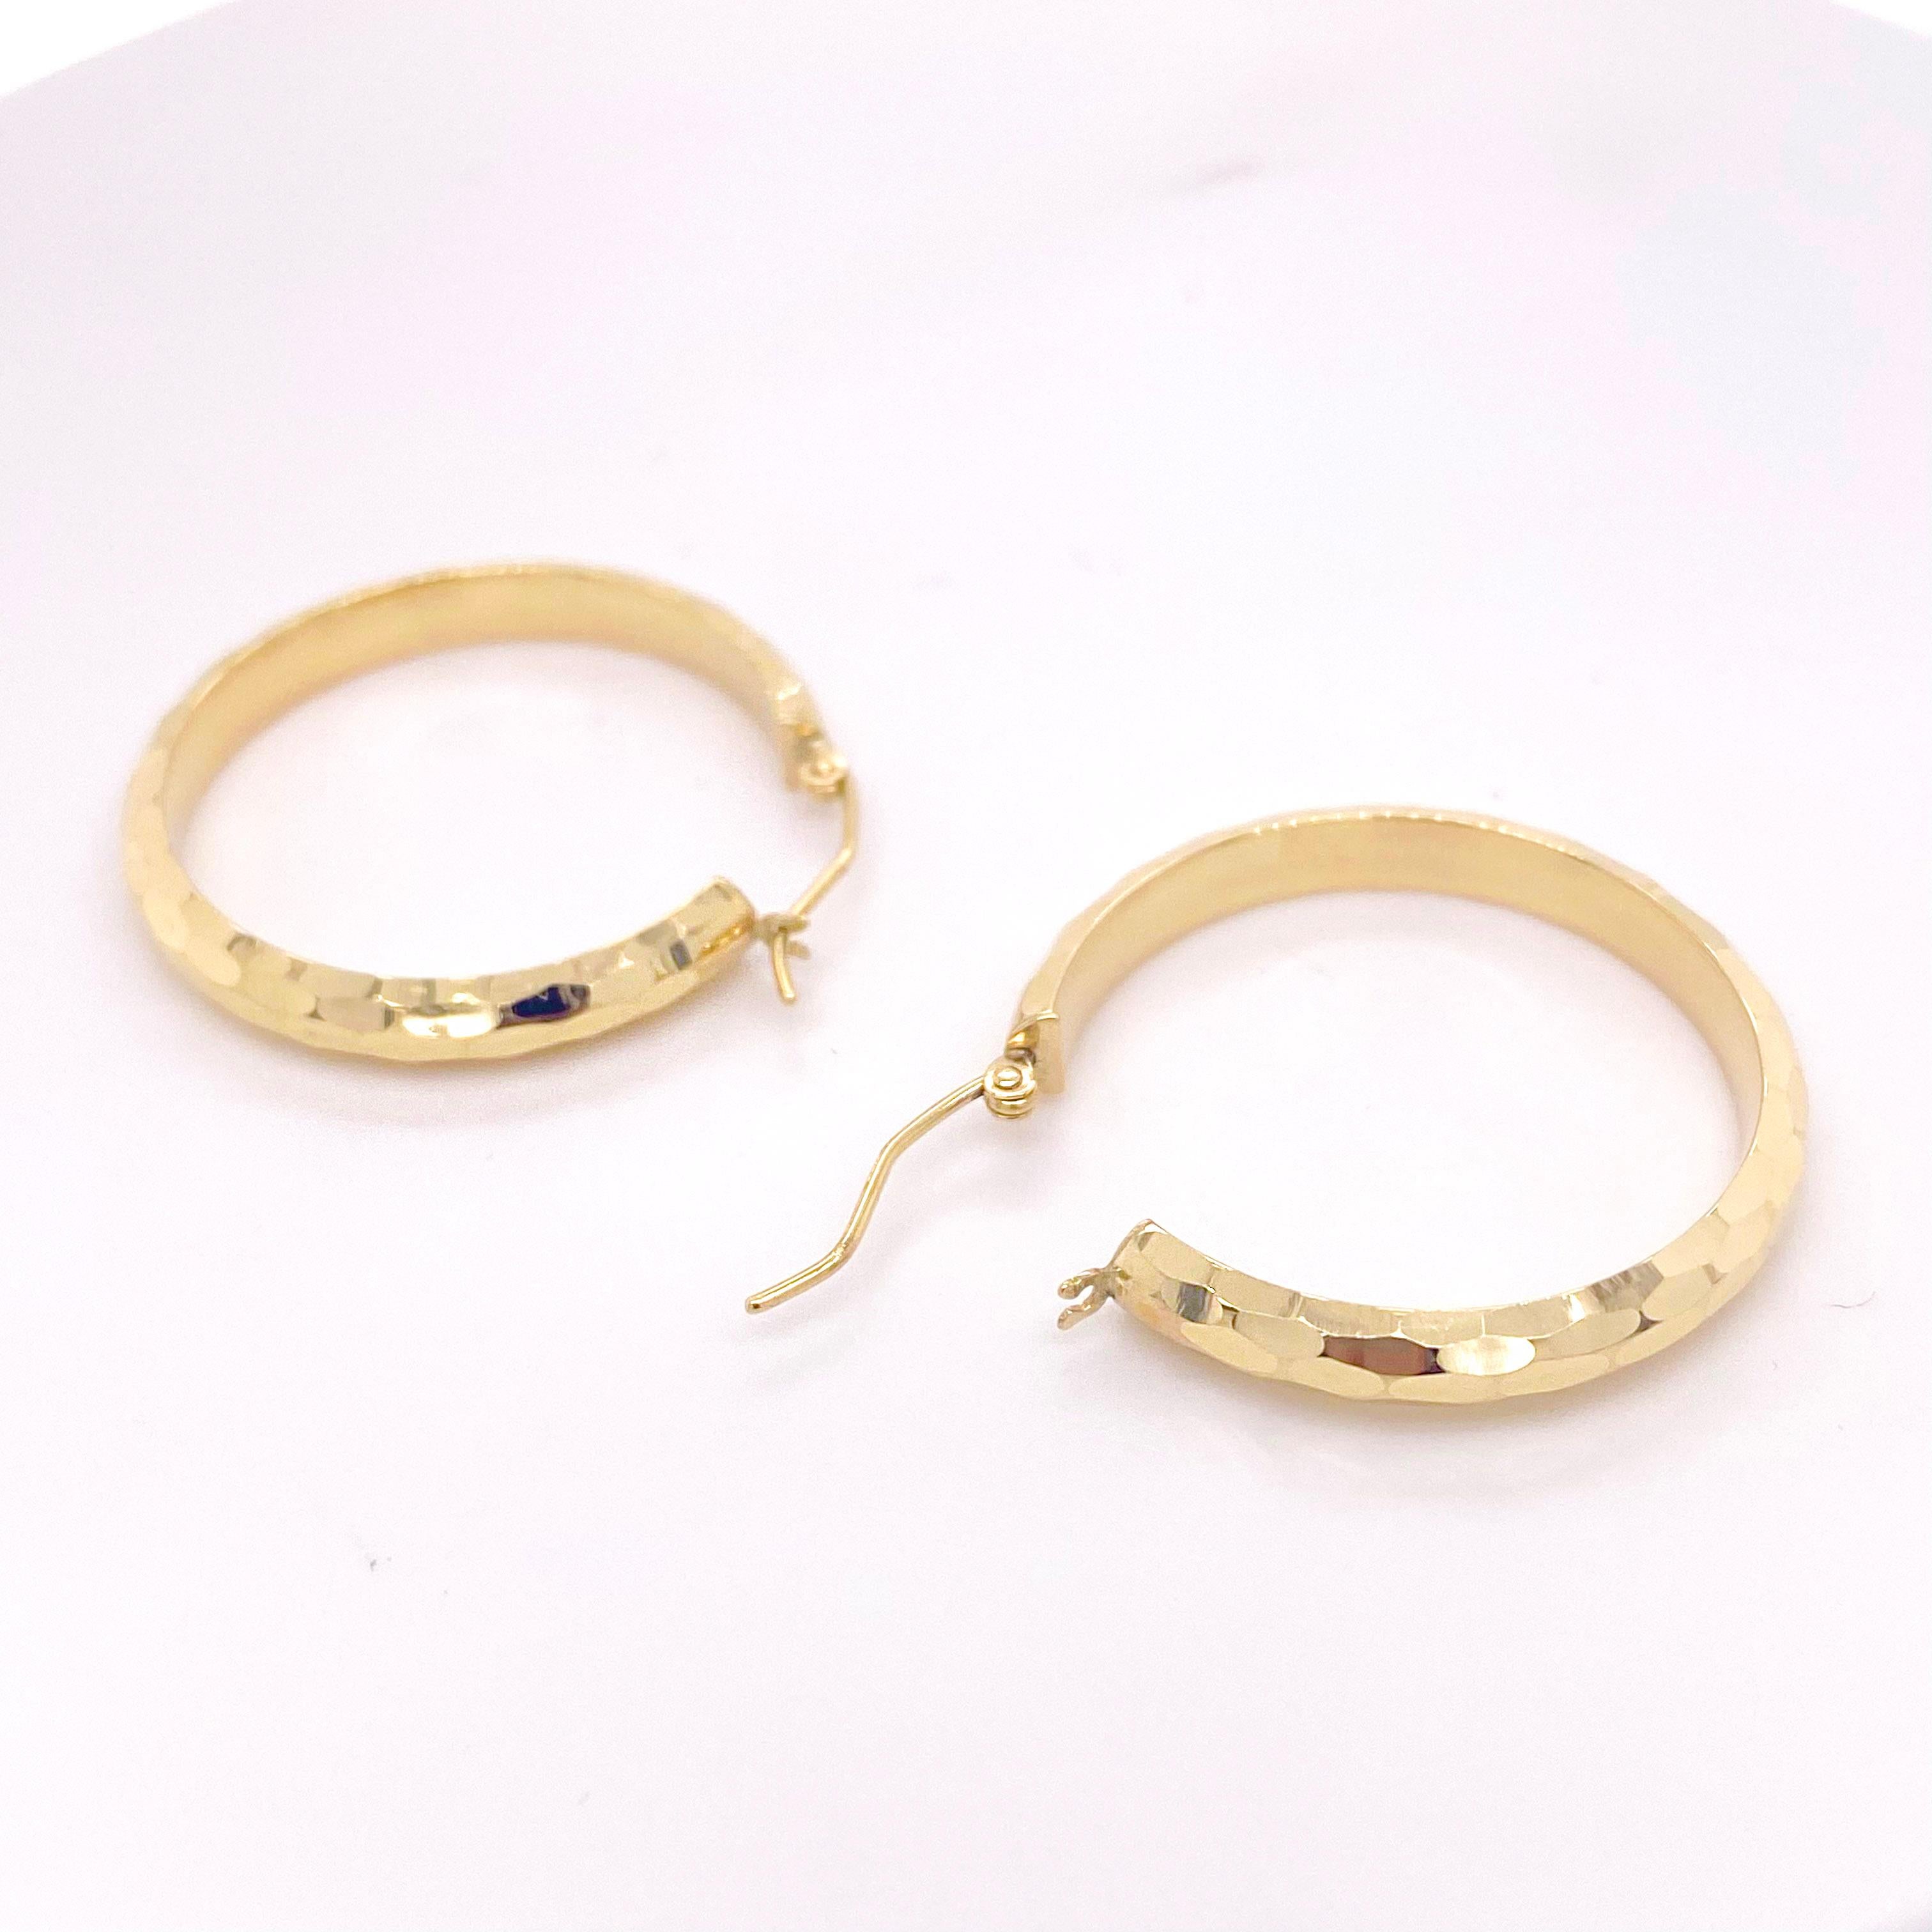 Gold hoops are a jewelry staple! These hoop earrings are the perfect addition to any fine jewelry collection. With a classic design and unique diamond-cut finish, these hoops are so versatile! Wear them everyday, casually or save them for a special